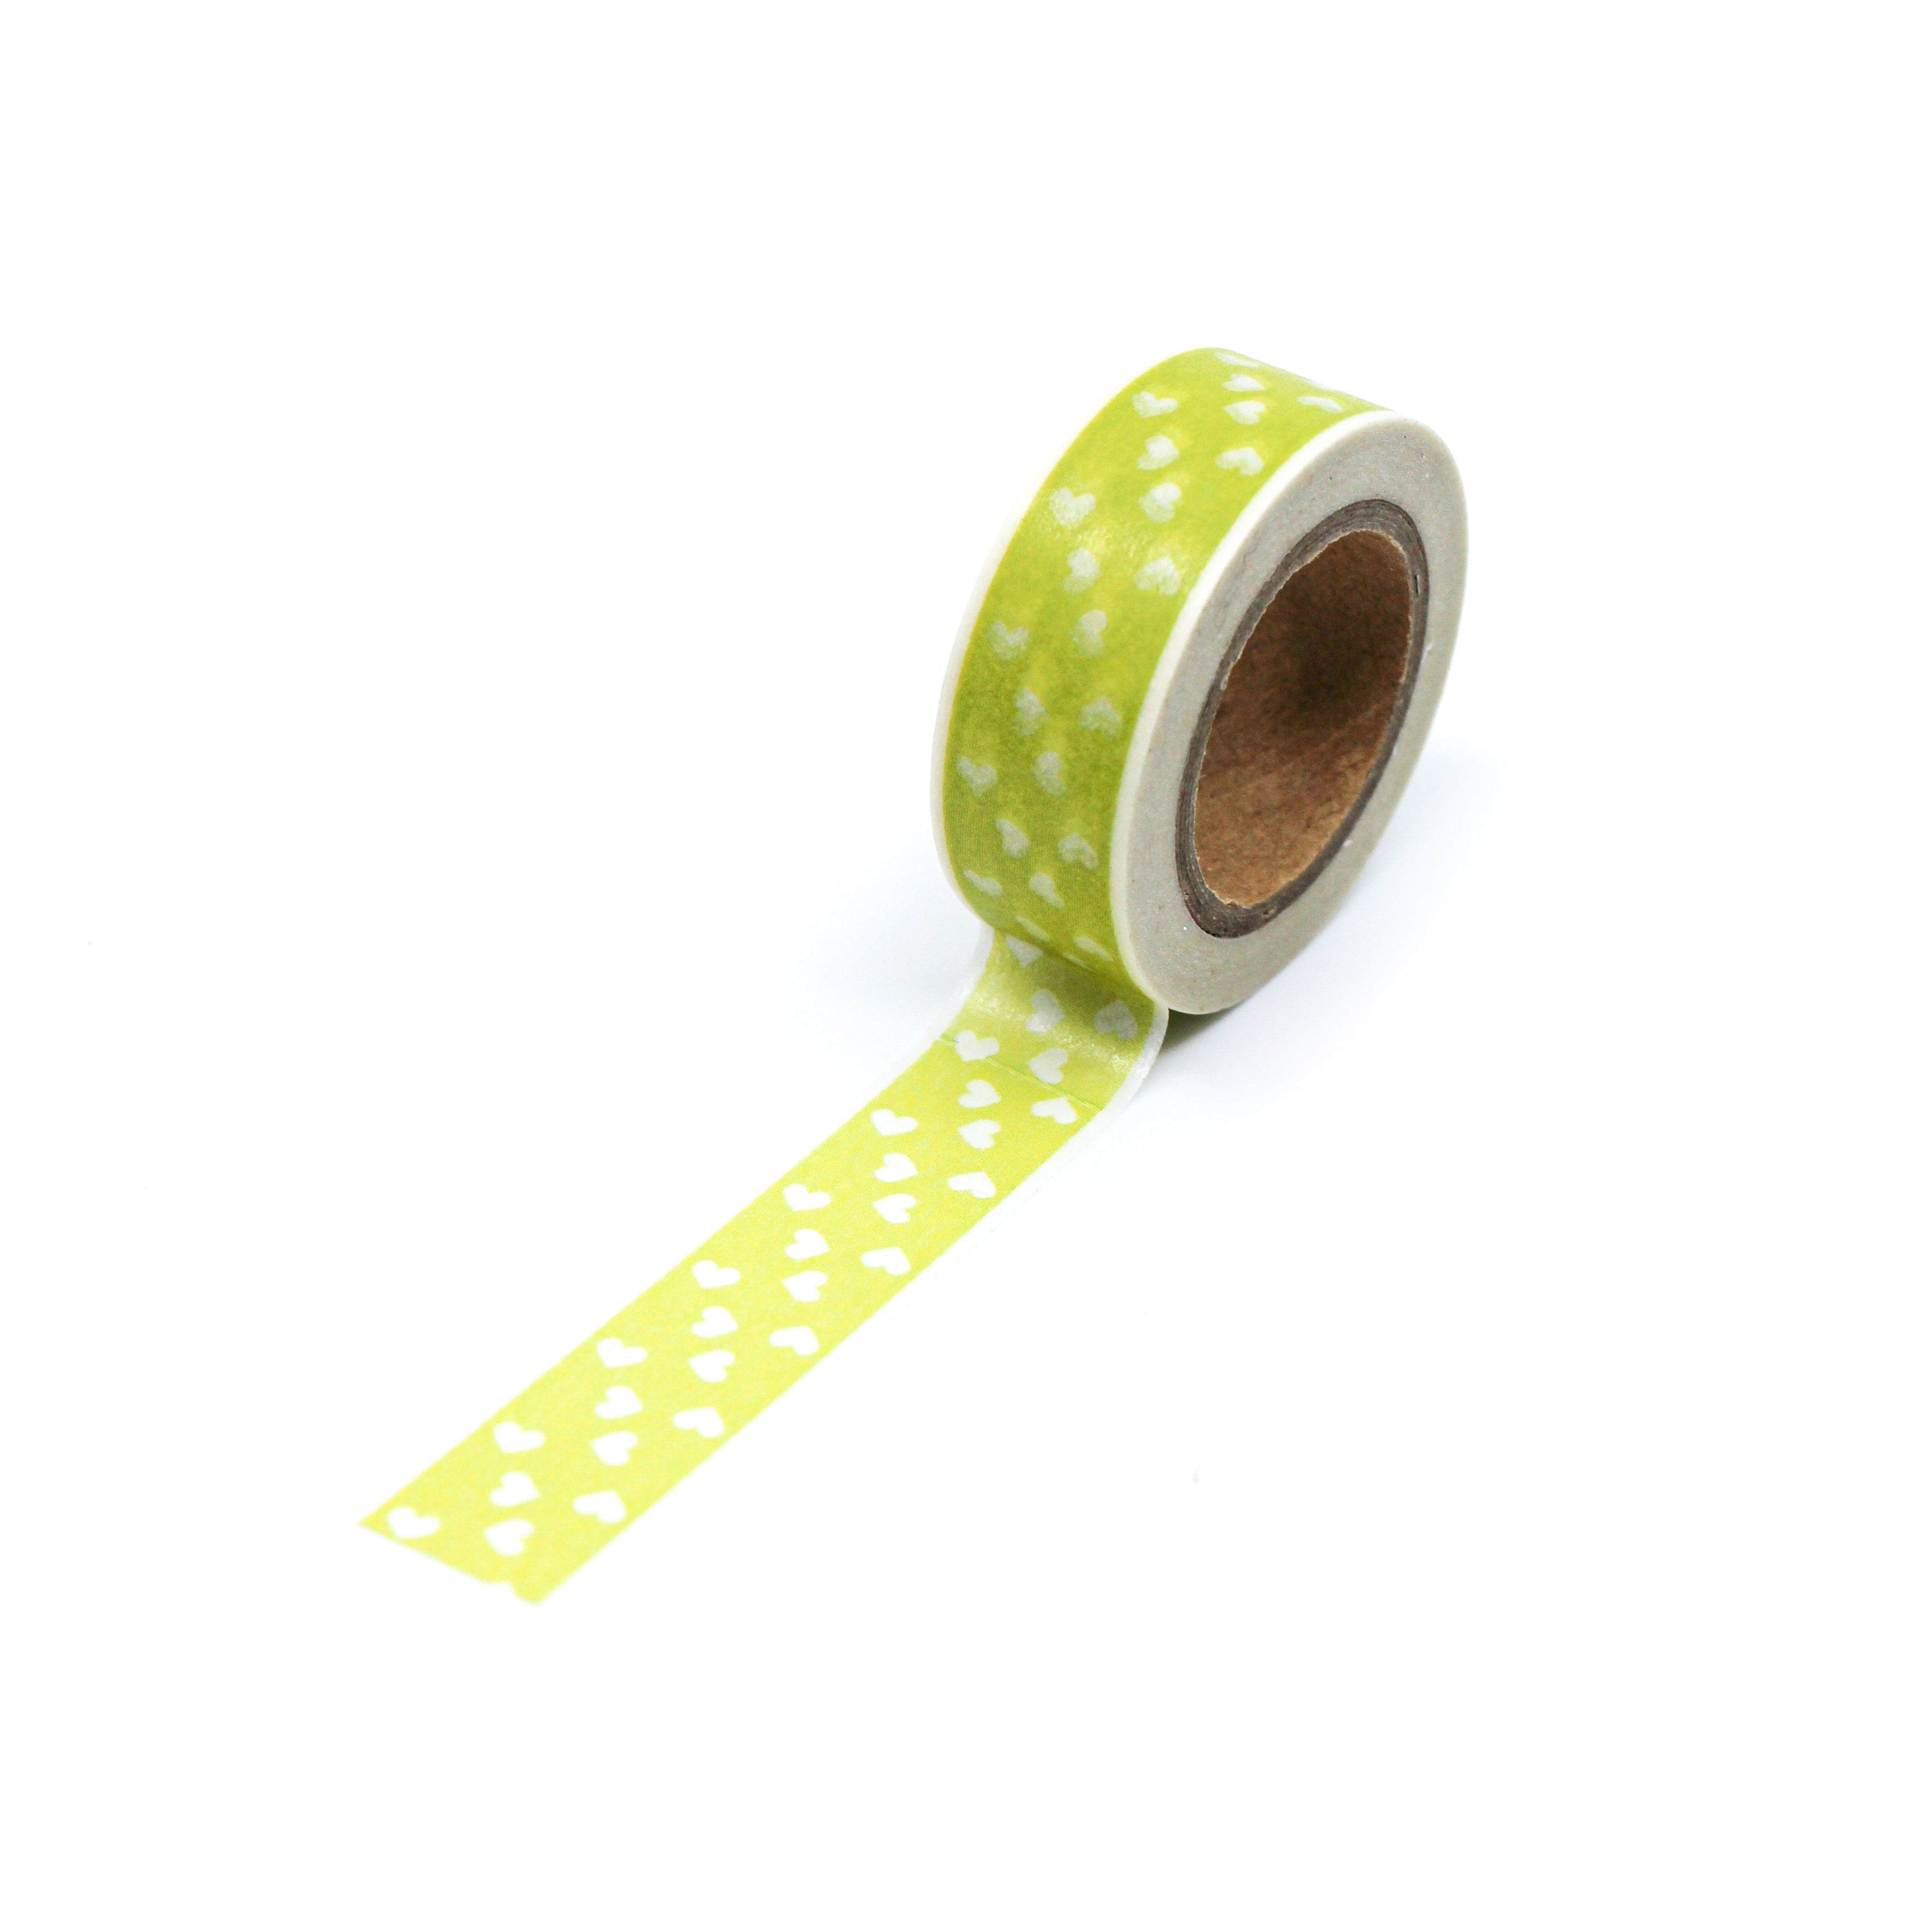 This is a full pattern repeat view of yellow multi hearts washi tape BBB Supplies Craft Shop